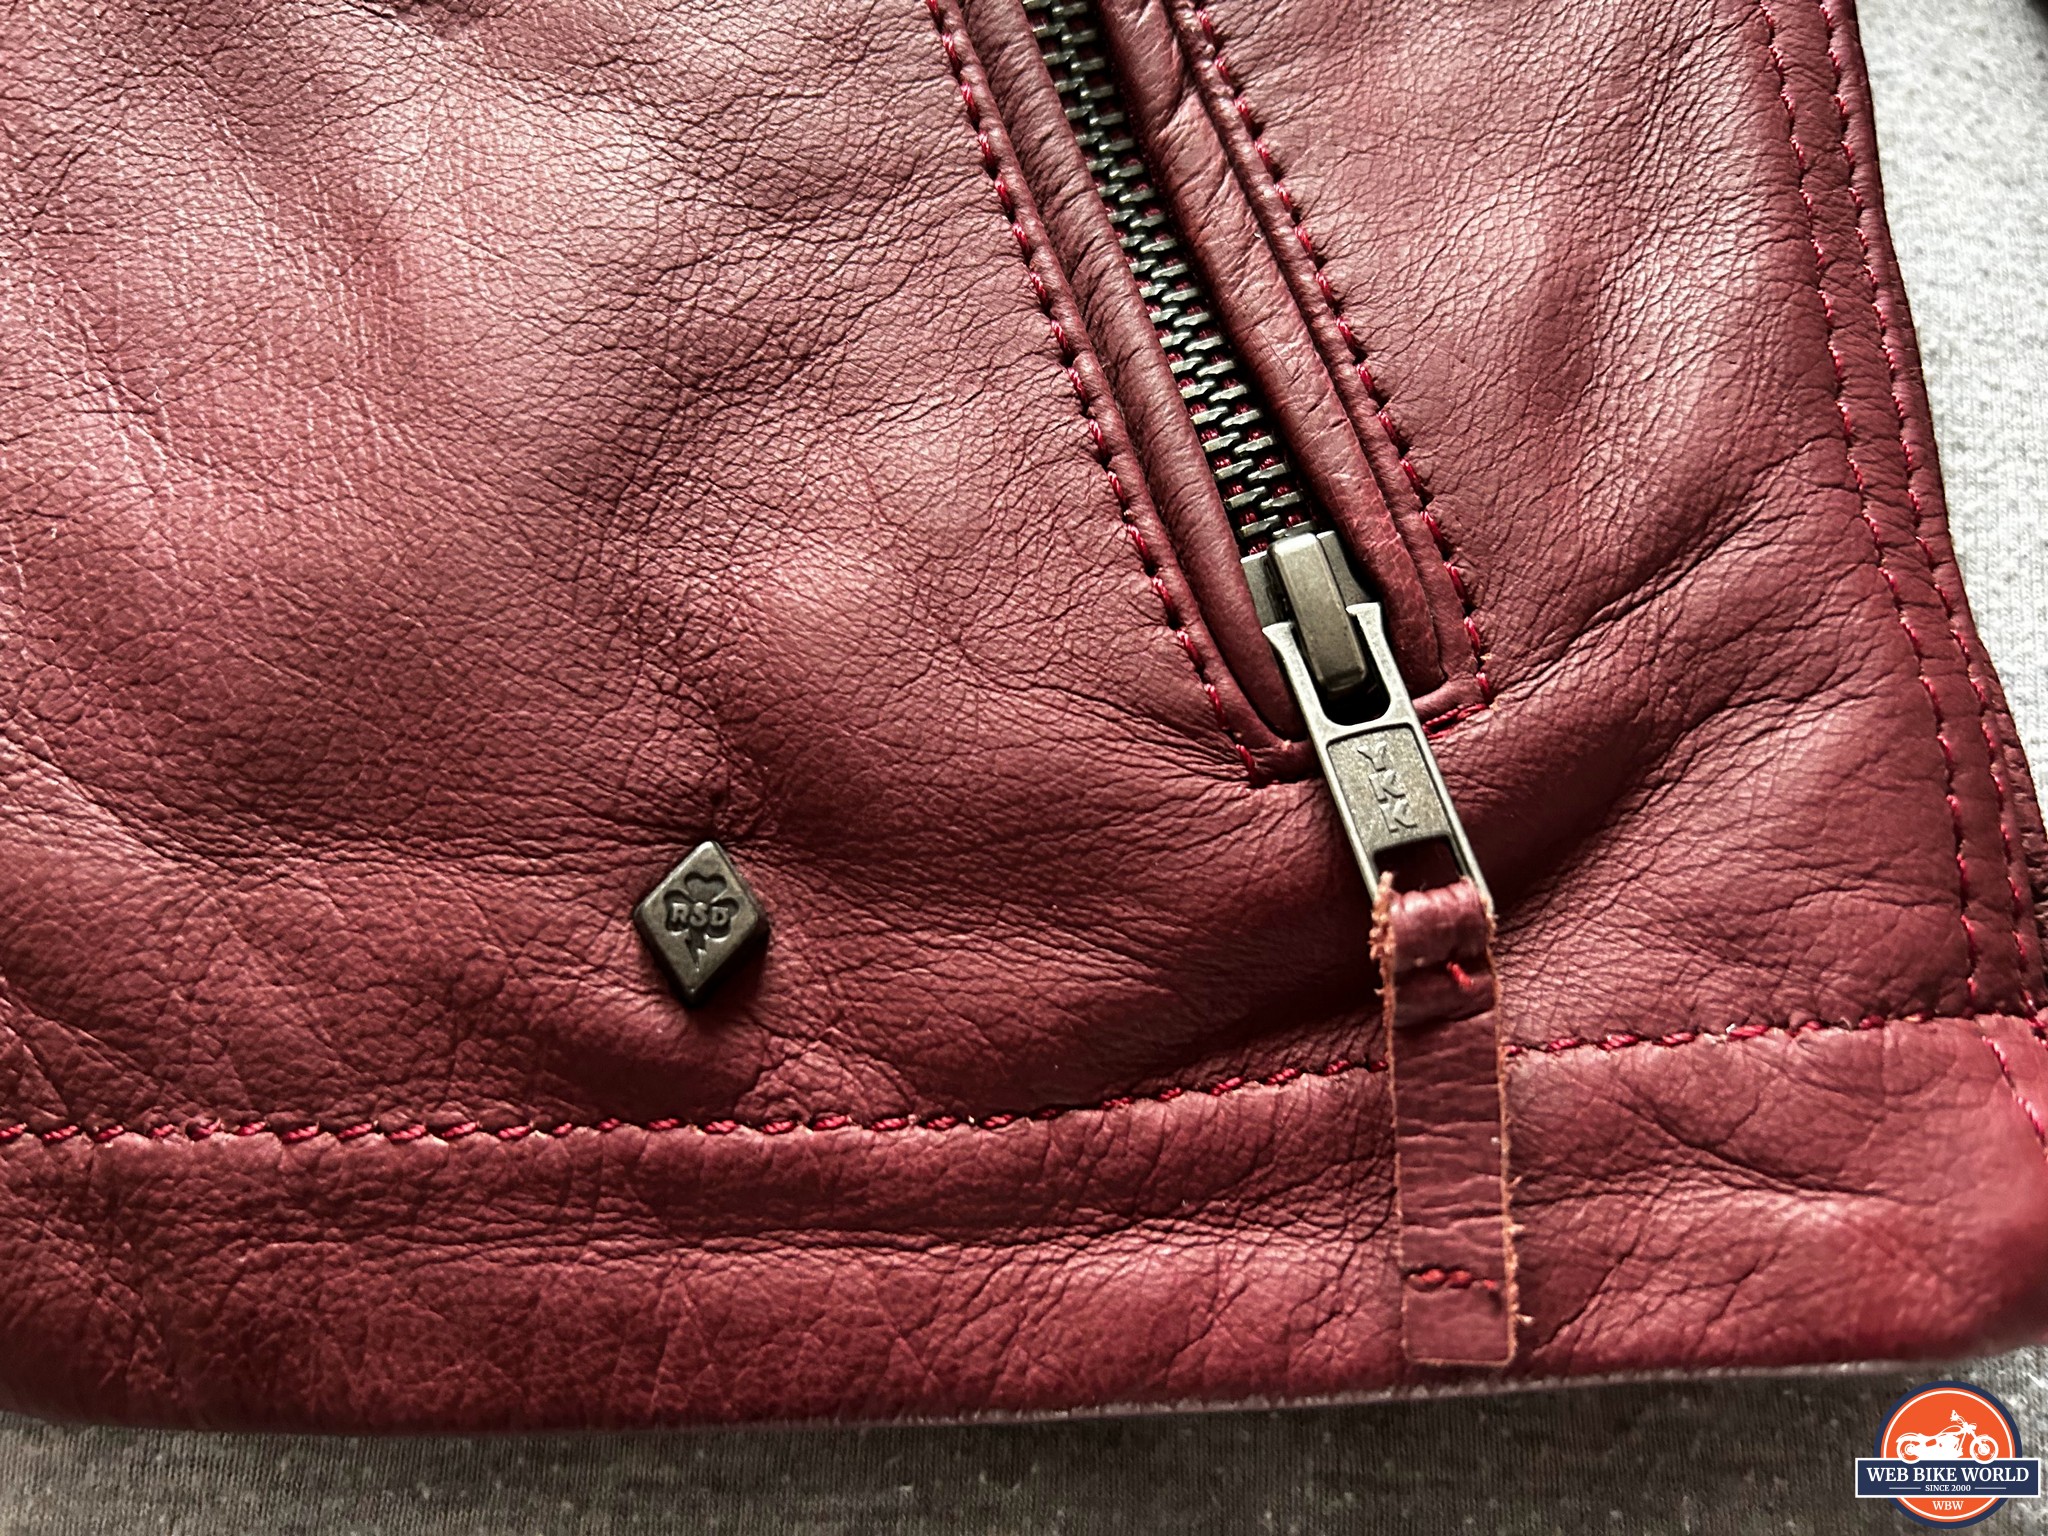 Closeup of the branded press stud on the RSD Seventy4 Atherton jacket